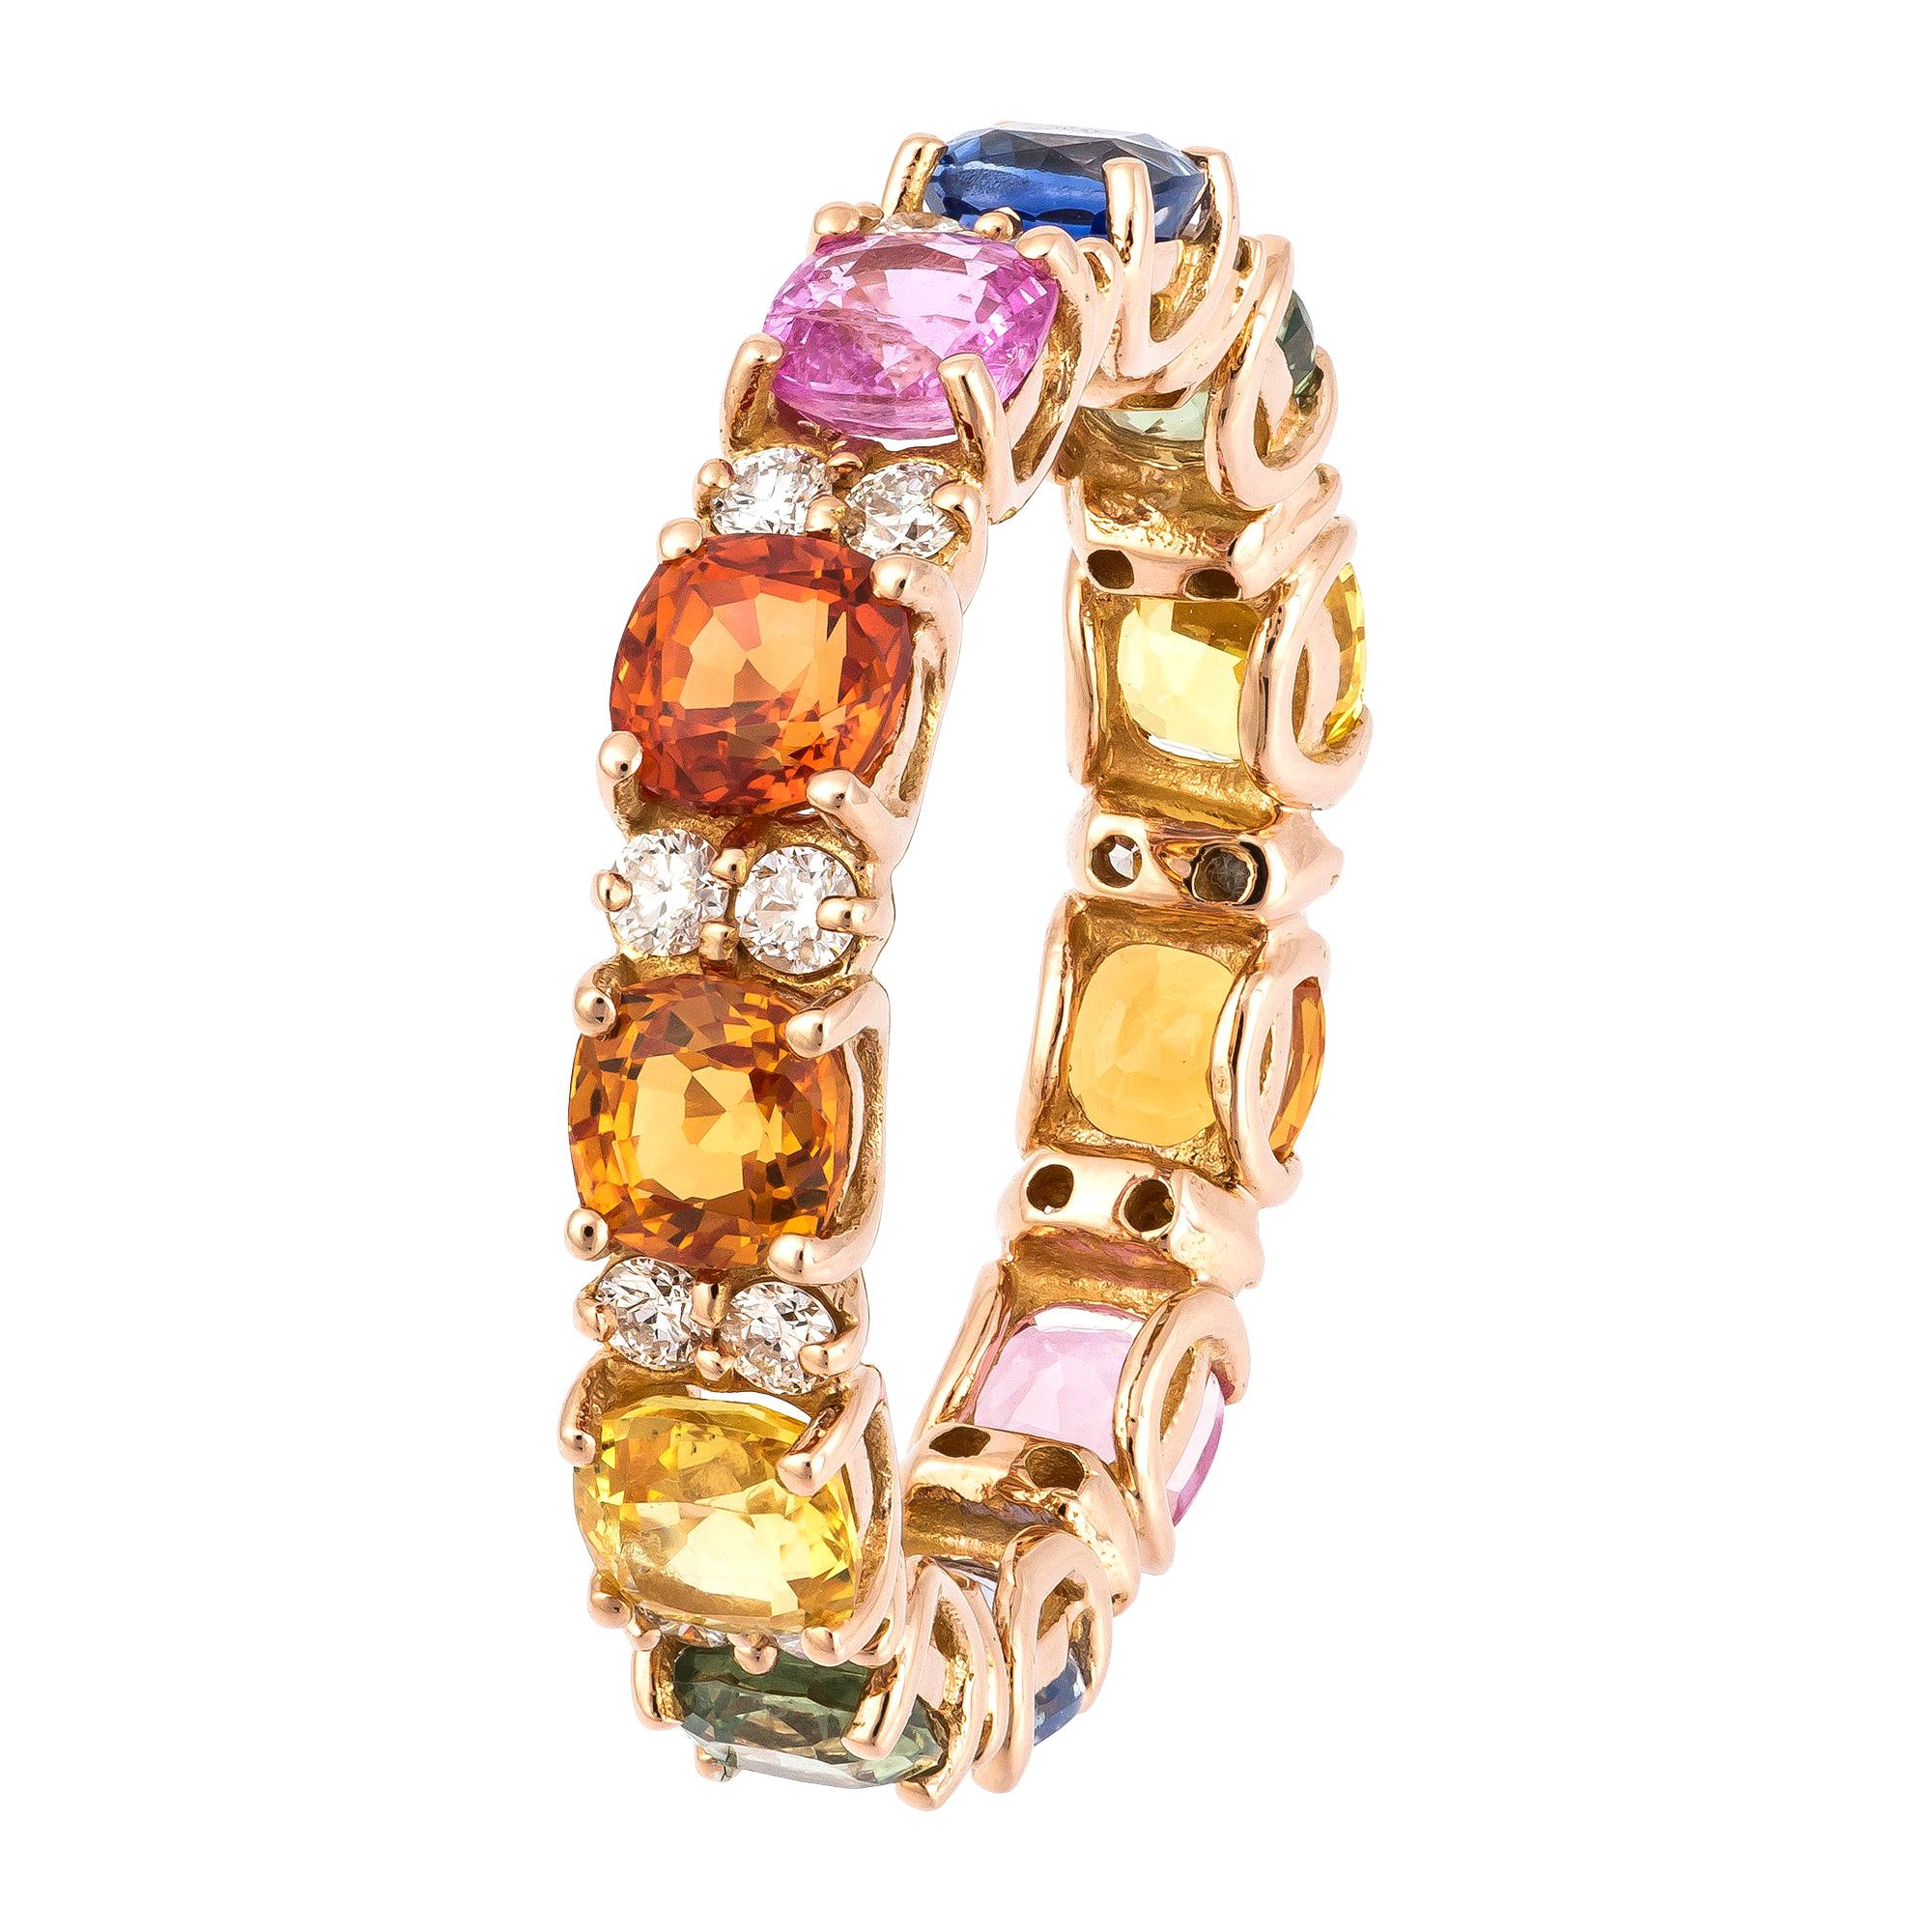 Fancy Multisapphire Diamond Rose Gold 18k Colourful Rainbow Ring for Her